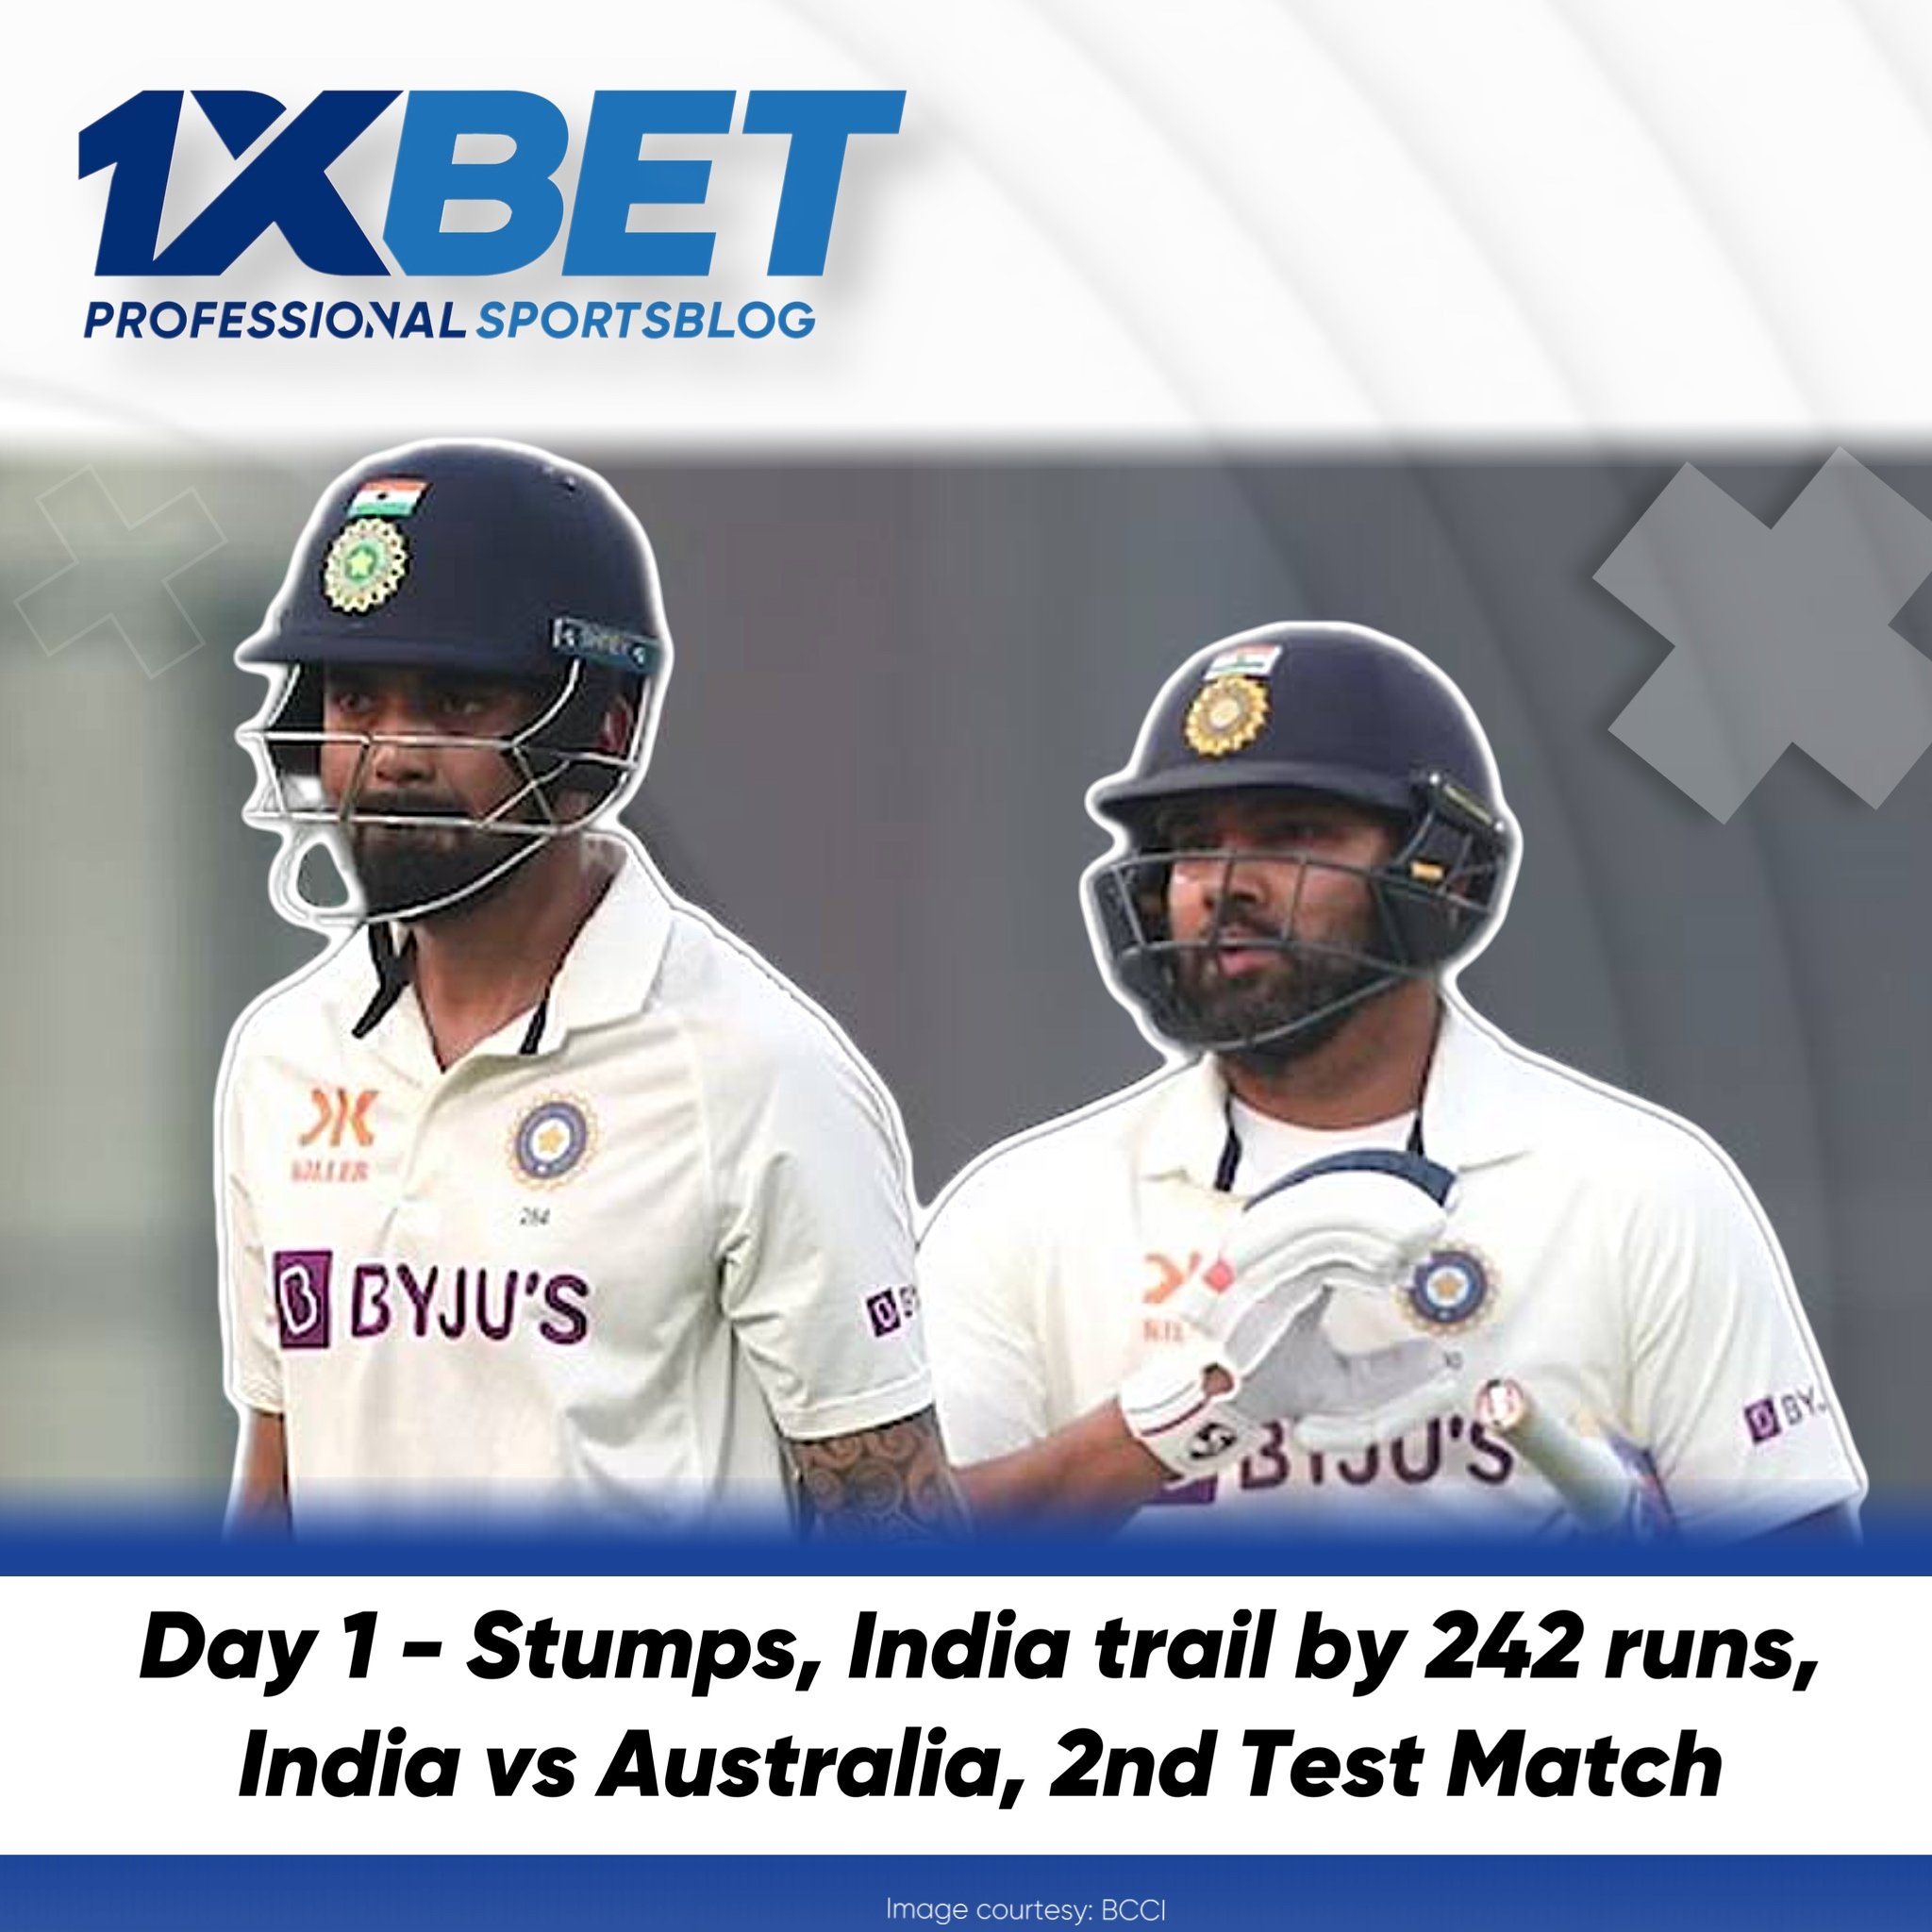 Day 1 - Stumps, India trail by 242 runs